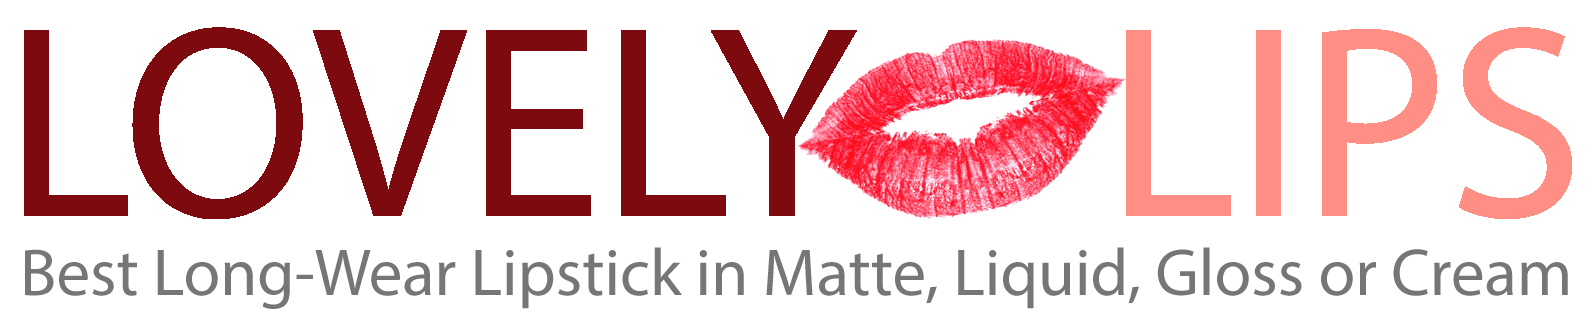 Lipstick Red N Logo - The Benefits of of Wearing Lipstick and Psychologically